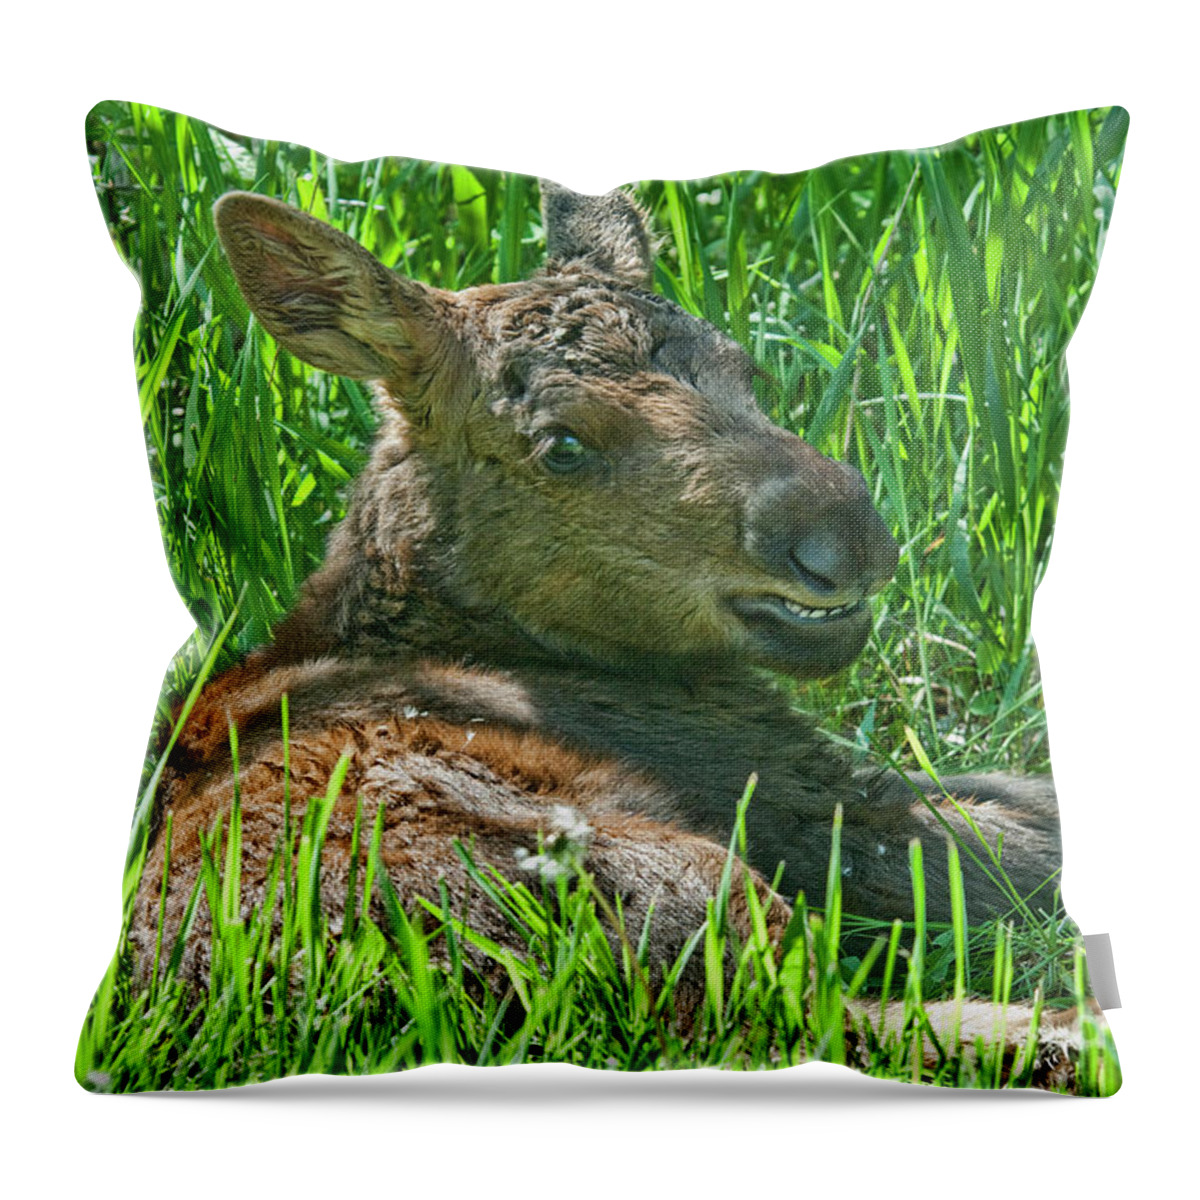 Moose Baby Throw Pillow featuring the photograph Baby Moose by Gary Beeler